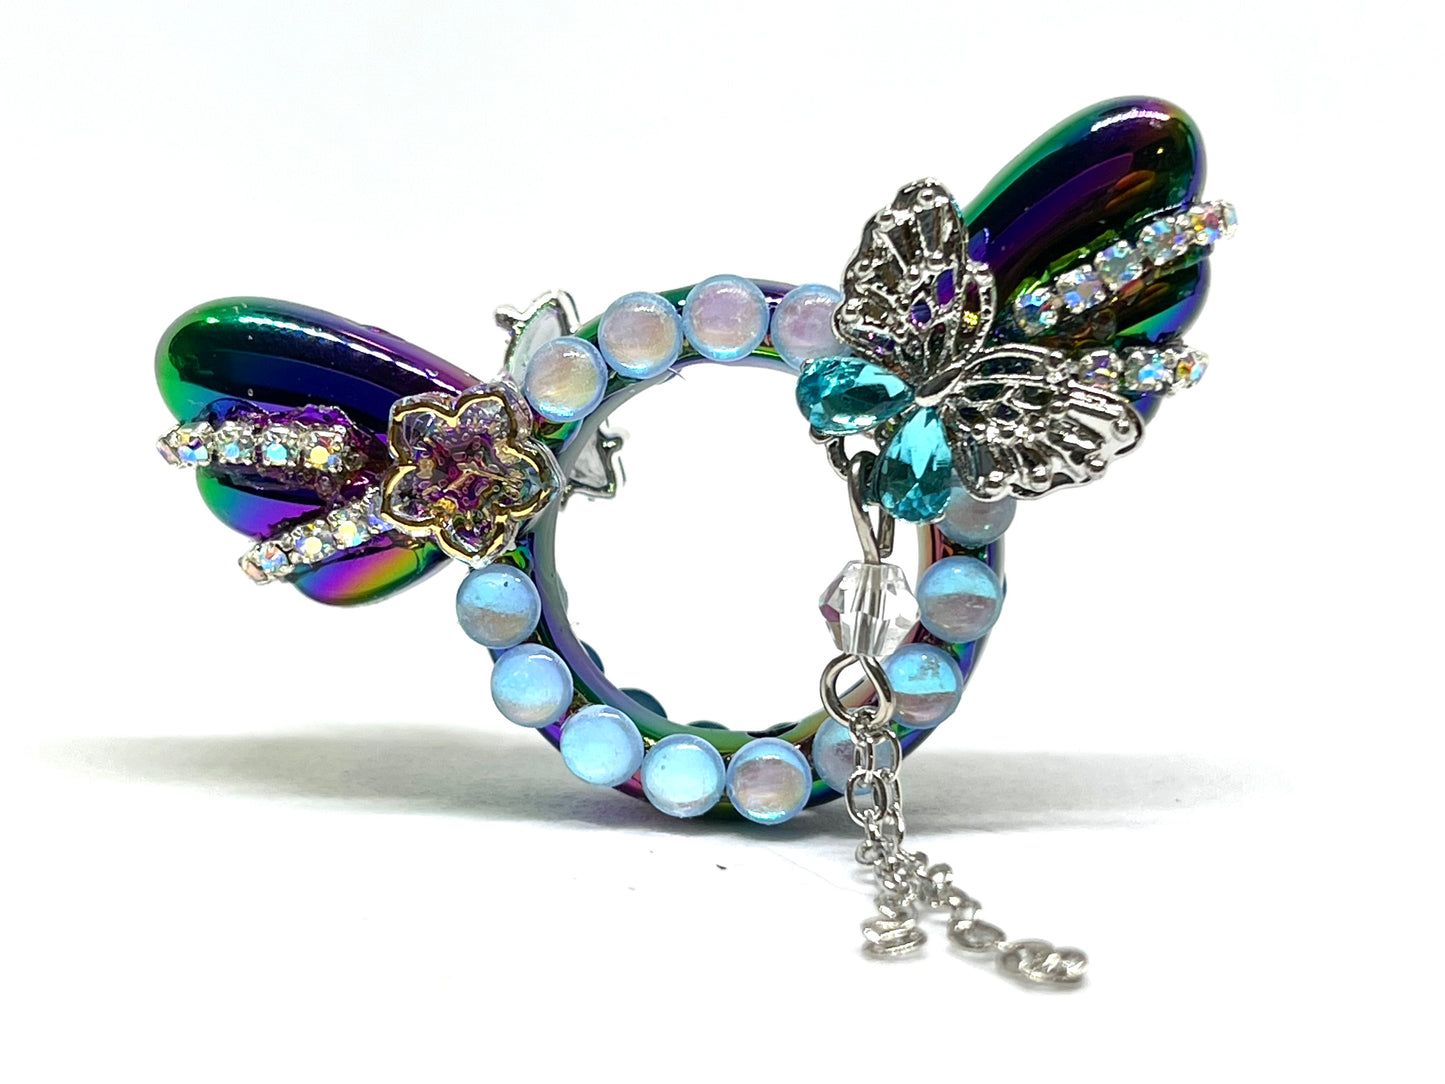 Fancy Butterfly Girl Beads | Wing Shape Luxury beads | Hand Placed Beads | Customer and Colorful Beads